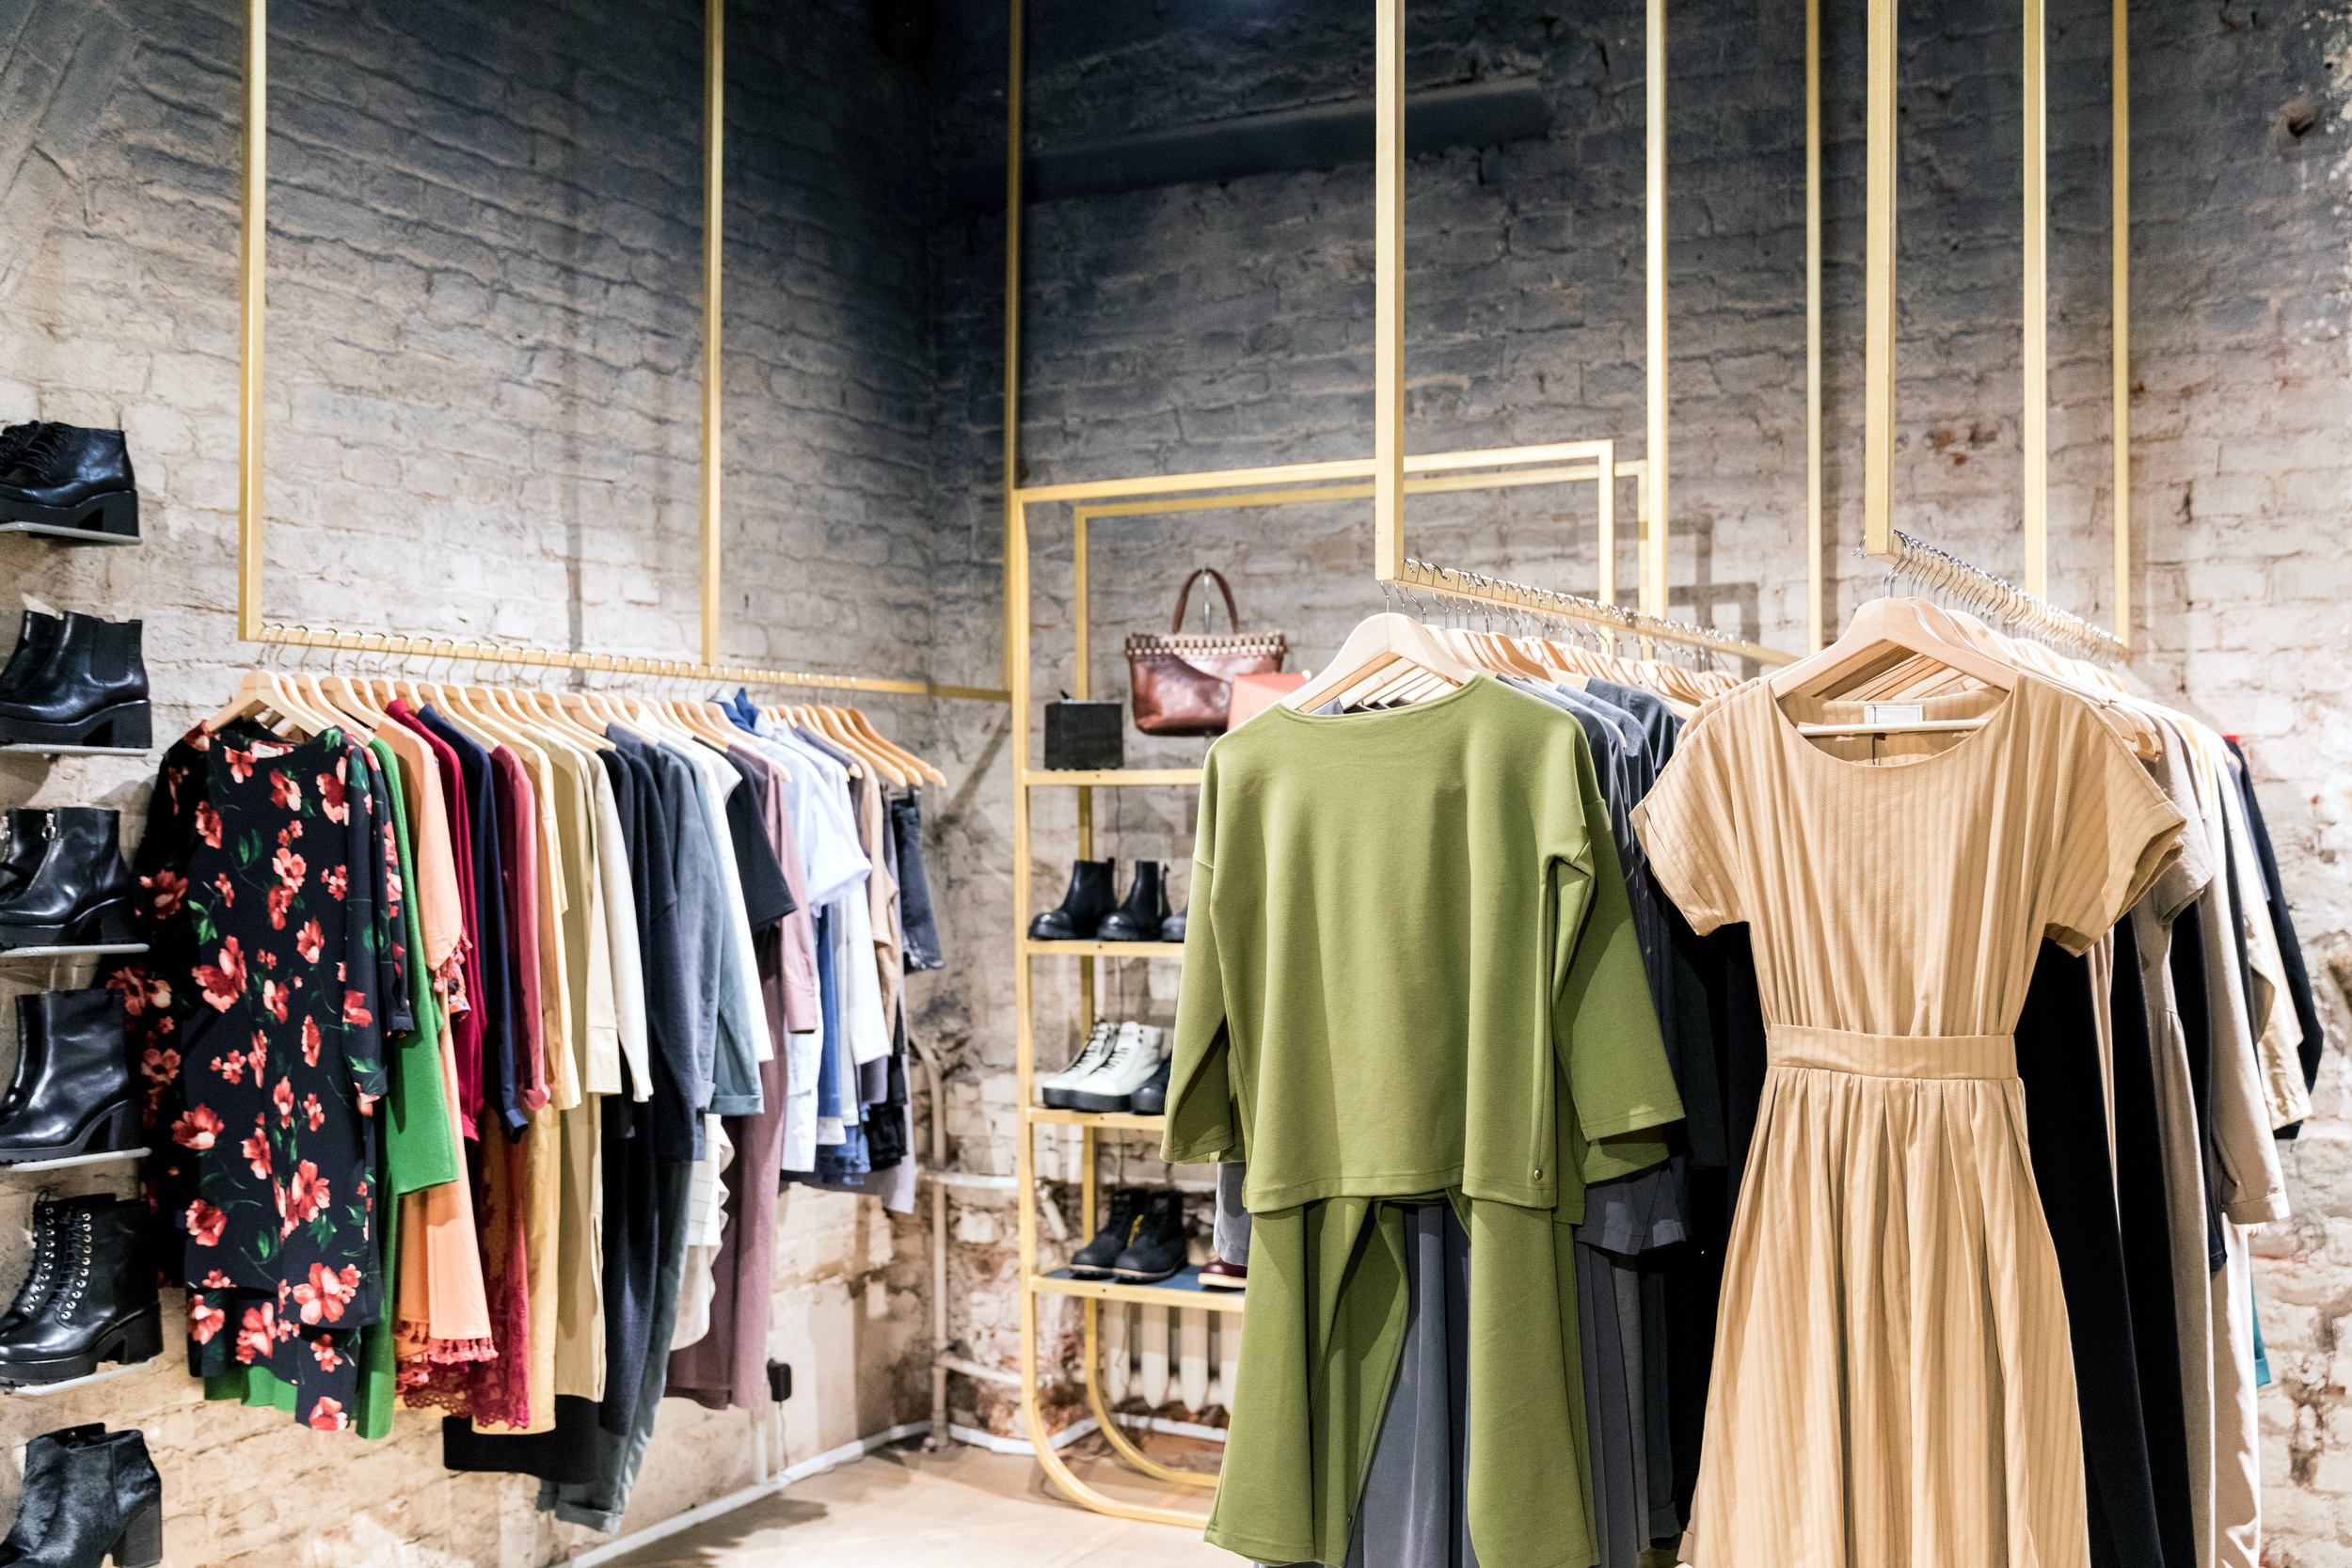 <p>As tempting as it might be to splurge on trendy new looks from fast-fashion purveyors, this industry contributes greatly to landfills everywhere. Shop secondhand or buy garments that are built to last in favor of trendy pieces that will have to be tossed after a couple of wears. </p><p><a href='https://www.msn.com/en-us/community/channel/vid-cj9pqbr0vn9in2b6ddcd8sfgpfq6x6utp44fssrv6mc2gtybw0us'>Did you enjoy this slideshow? Follow us on MSN to see more of our exclusive lifestyle content.</a></p>